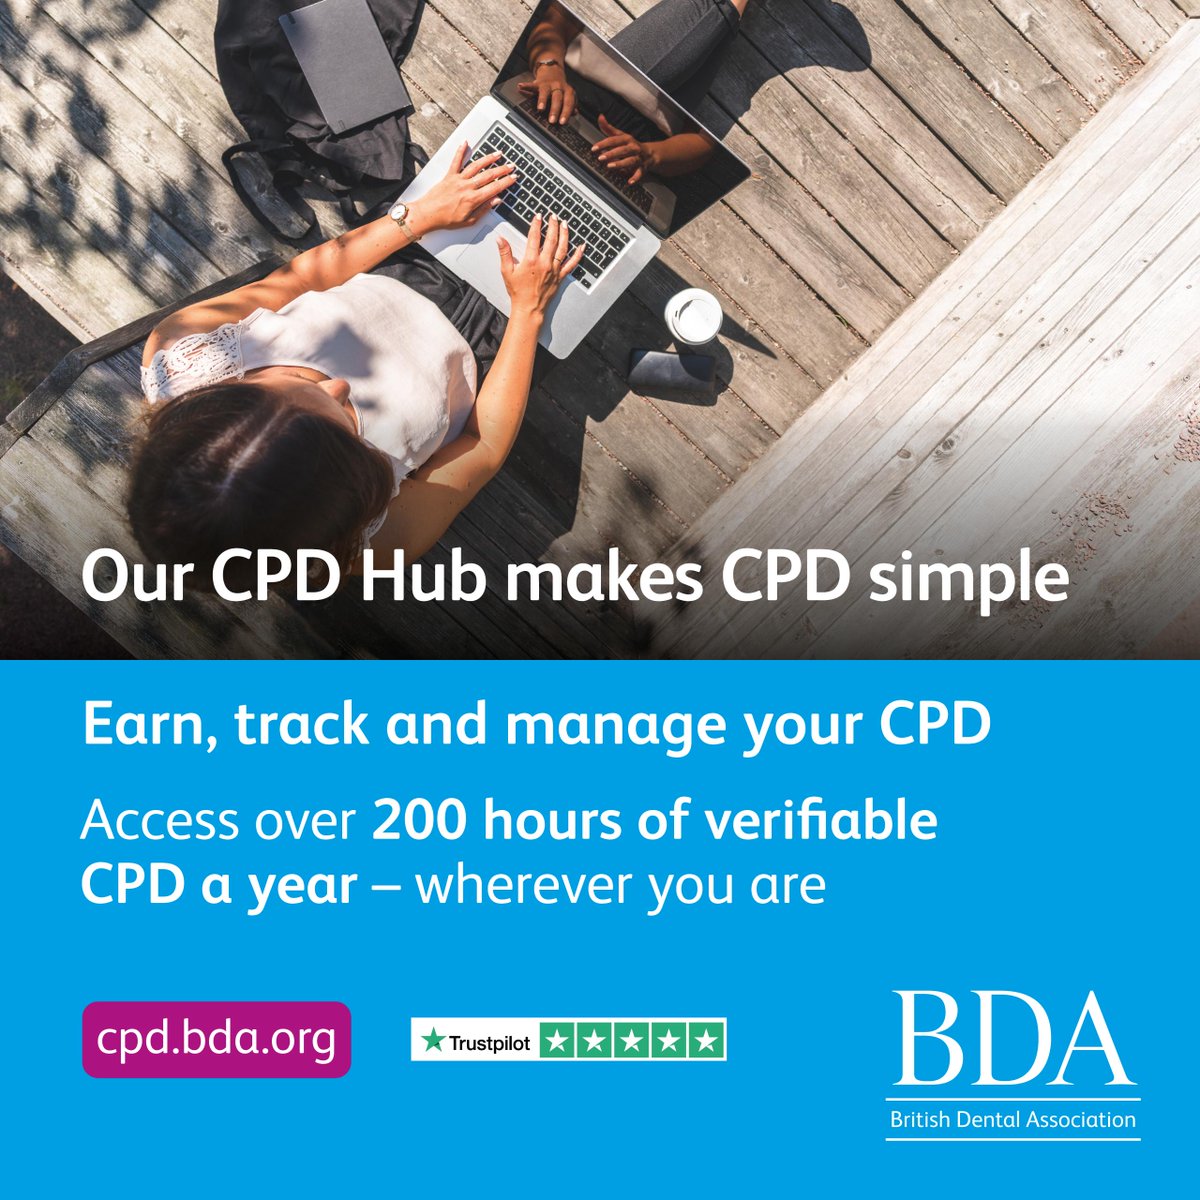 Our CPD Hub makes CPD simple. Earn it. Track it. Manage it. bit.ly/3QCCEke